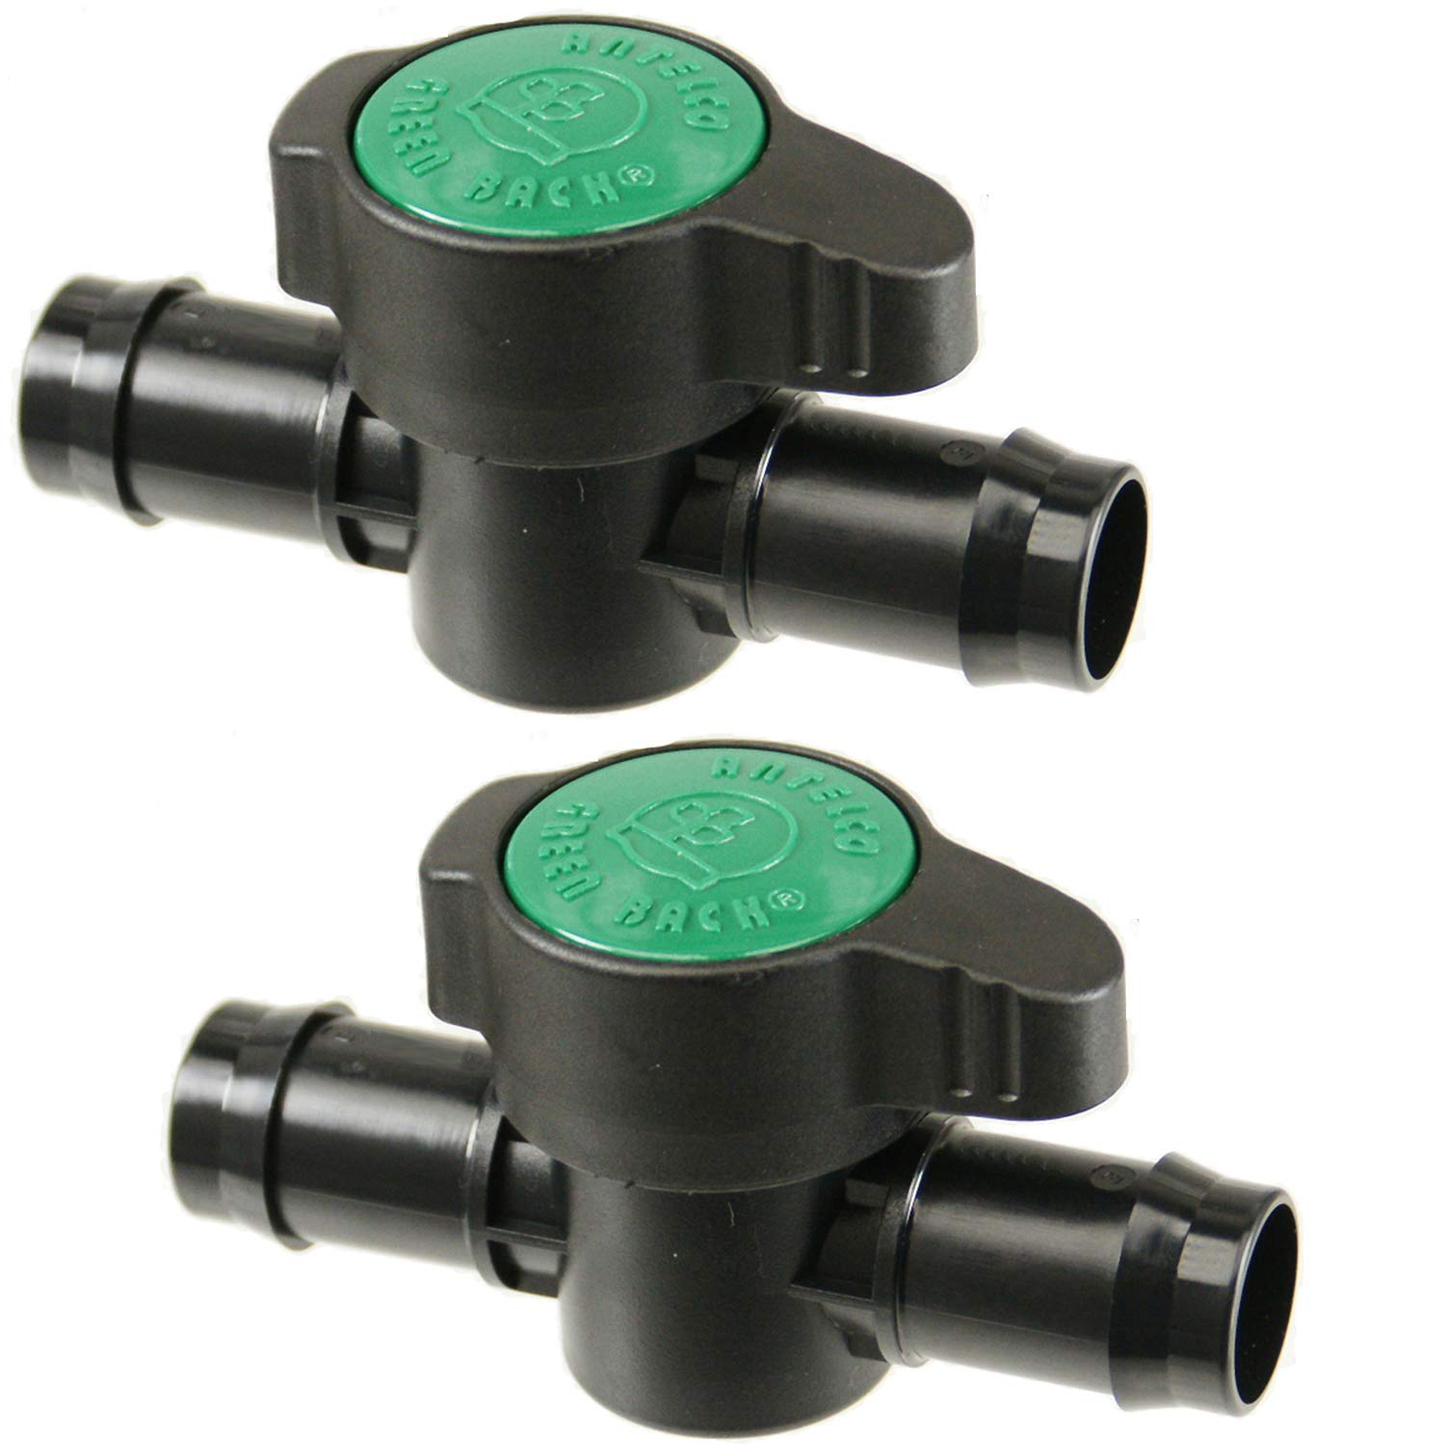 Habitech 2-Pack In-Line Barbed Ball Valve 13Mm for 1/2 Inch Tubing .520 ID - Regulate and Shut-Off/On Water Flow Animals & Pet Supplies > Pet Supplies > Fish Supplies > Aquarium & Pond Tubing Habitech 21mm (3/4" Tube .810 - .820 ID)  